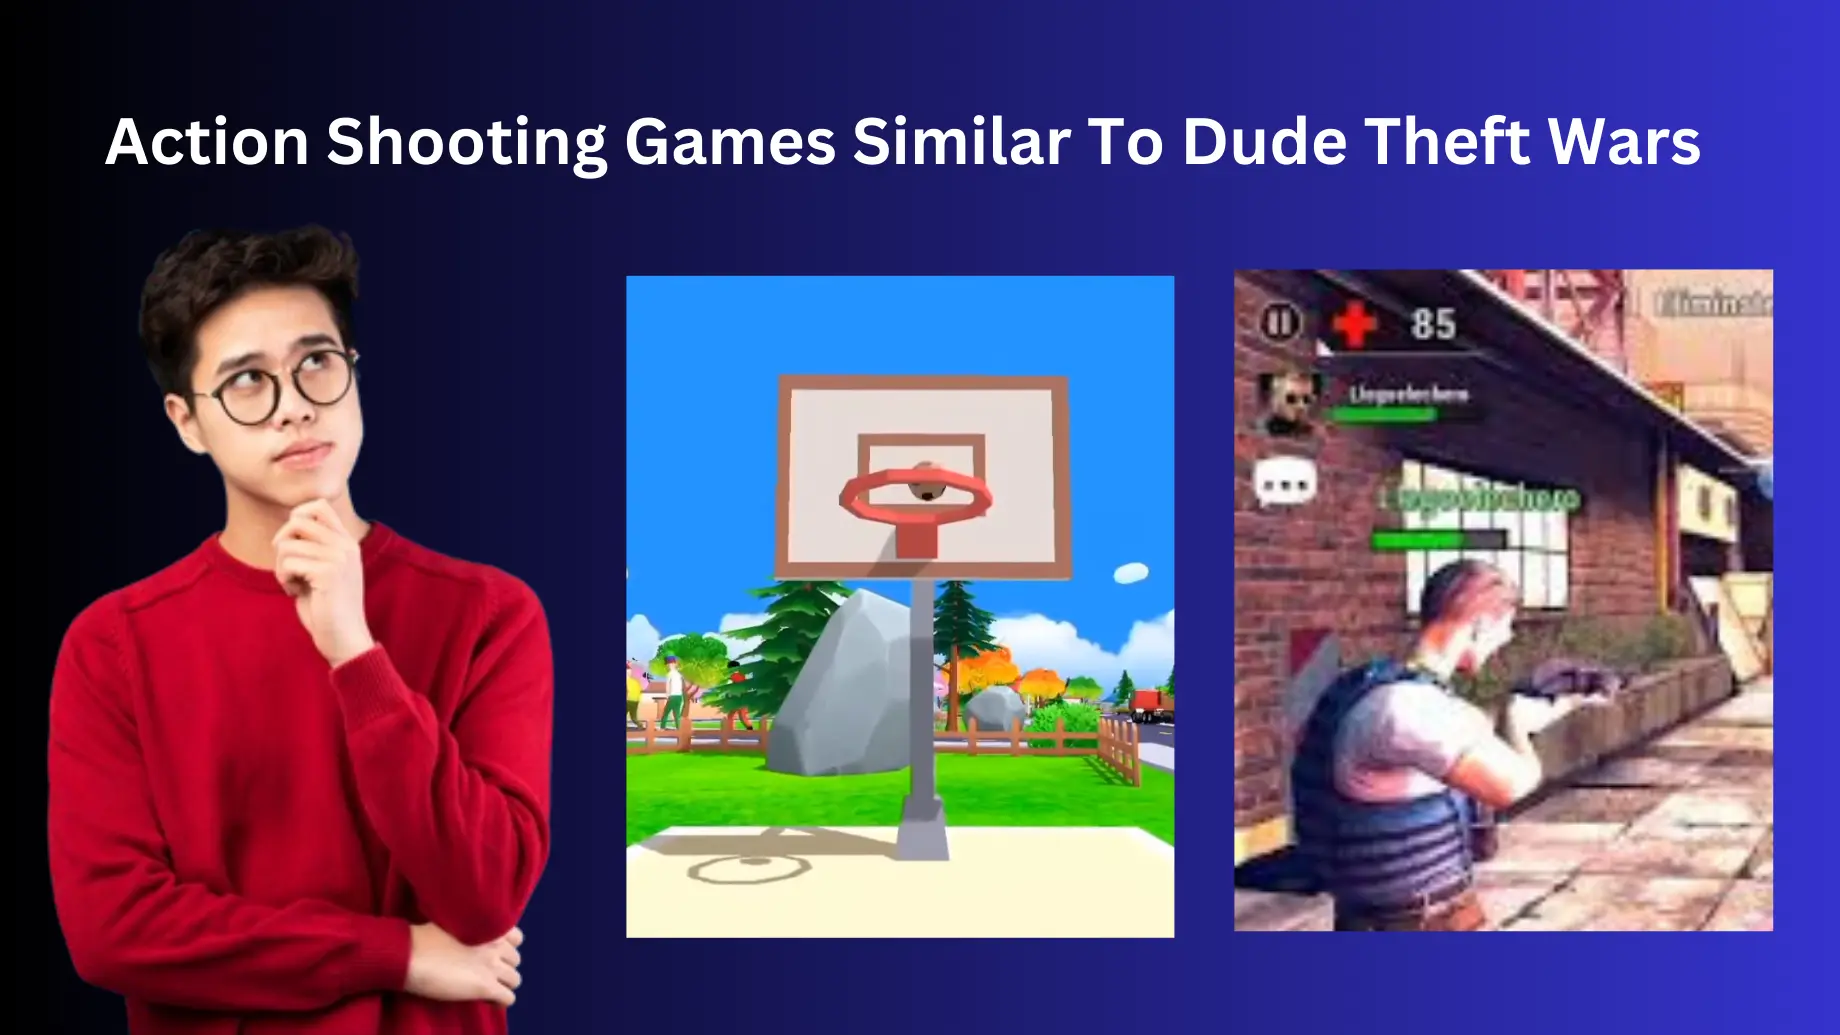 Shooting Games Similar To Dude Theft Wars